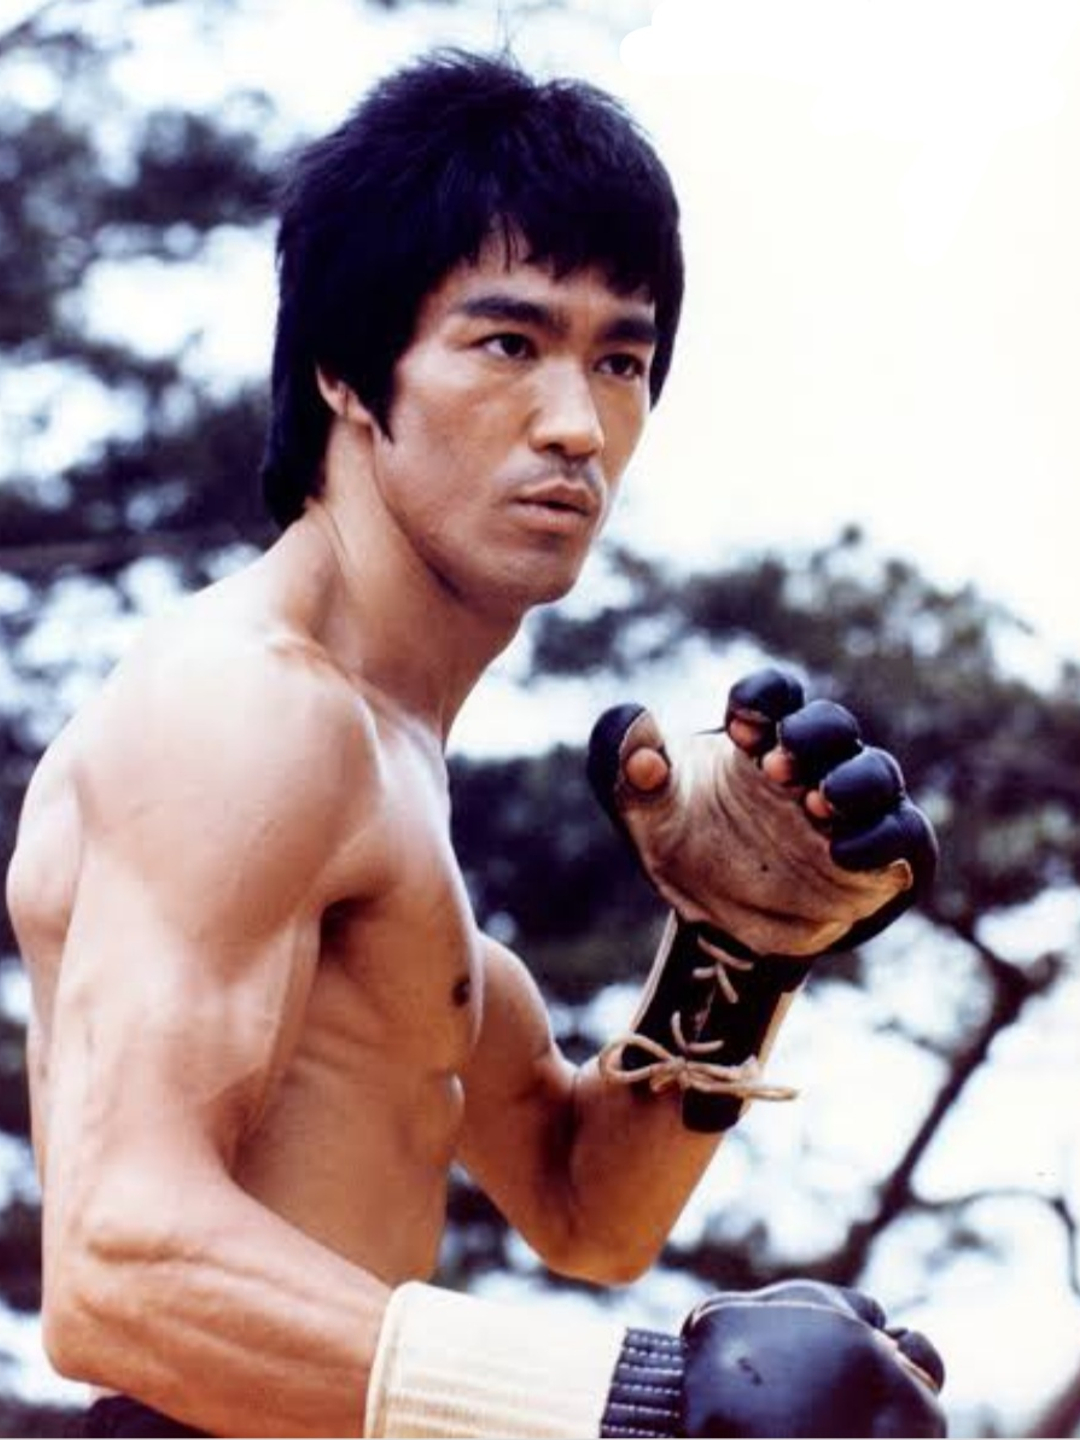 Bruce Lee how did he became famous